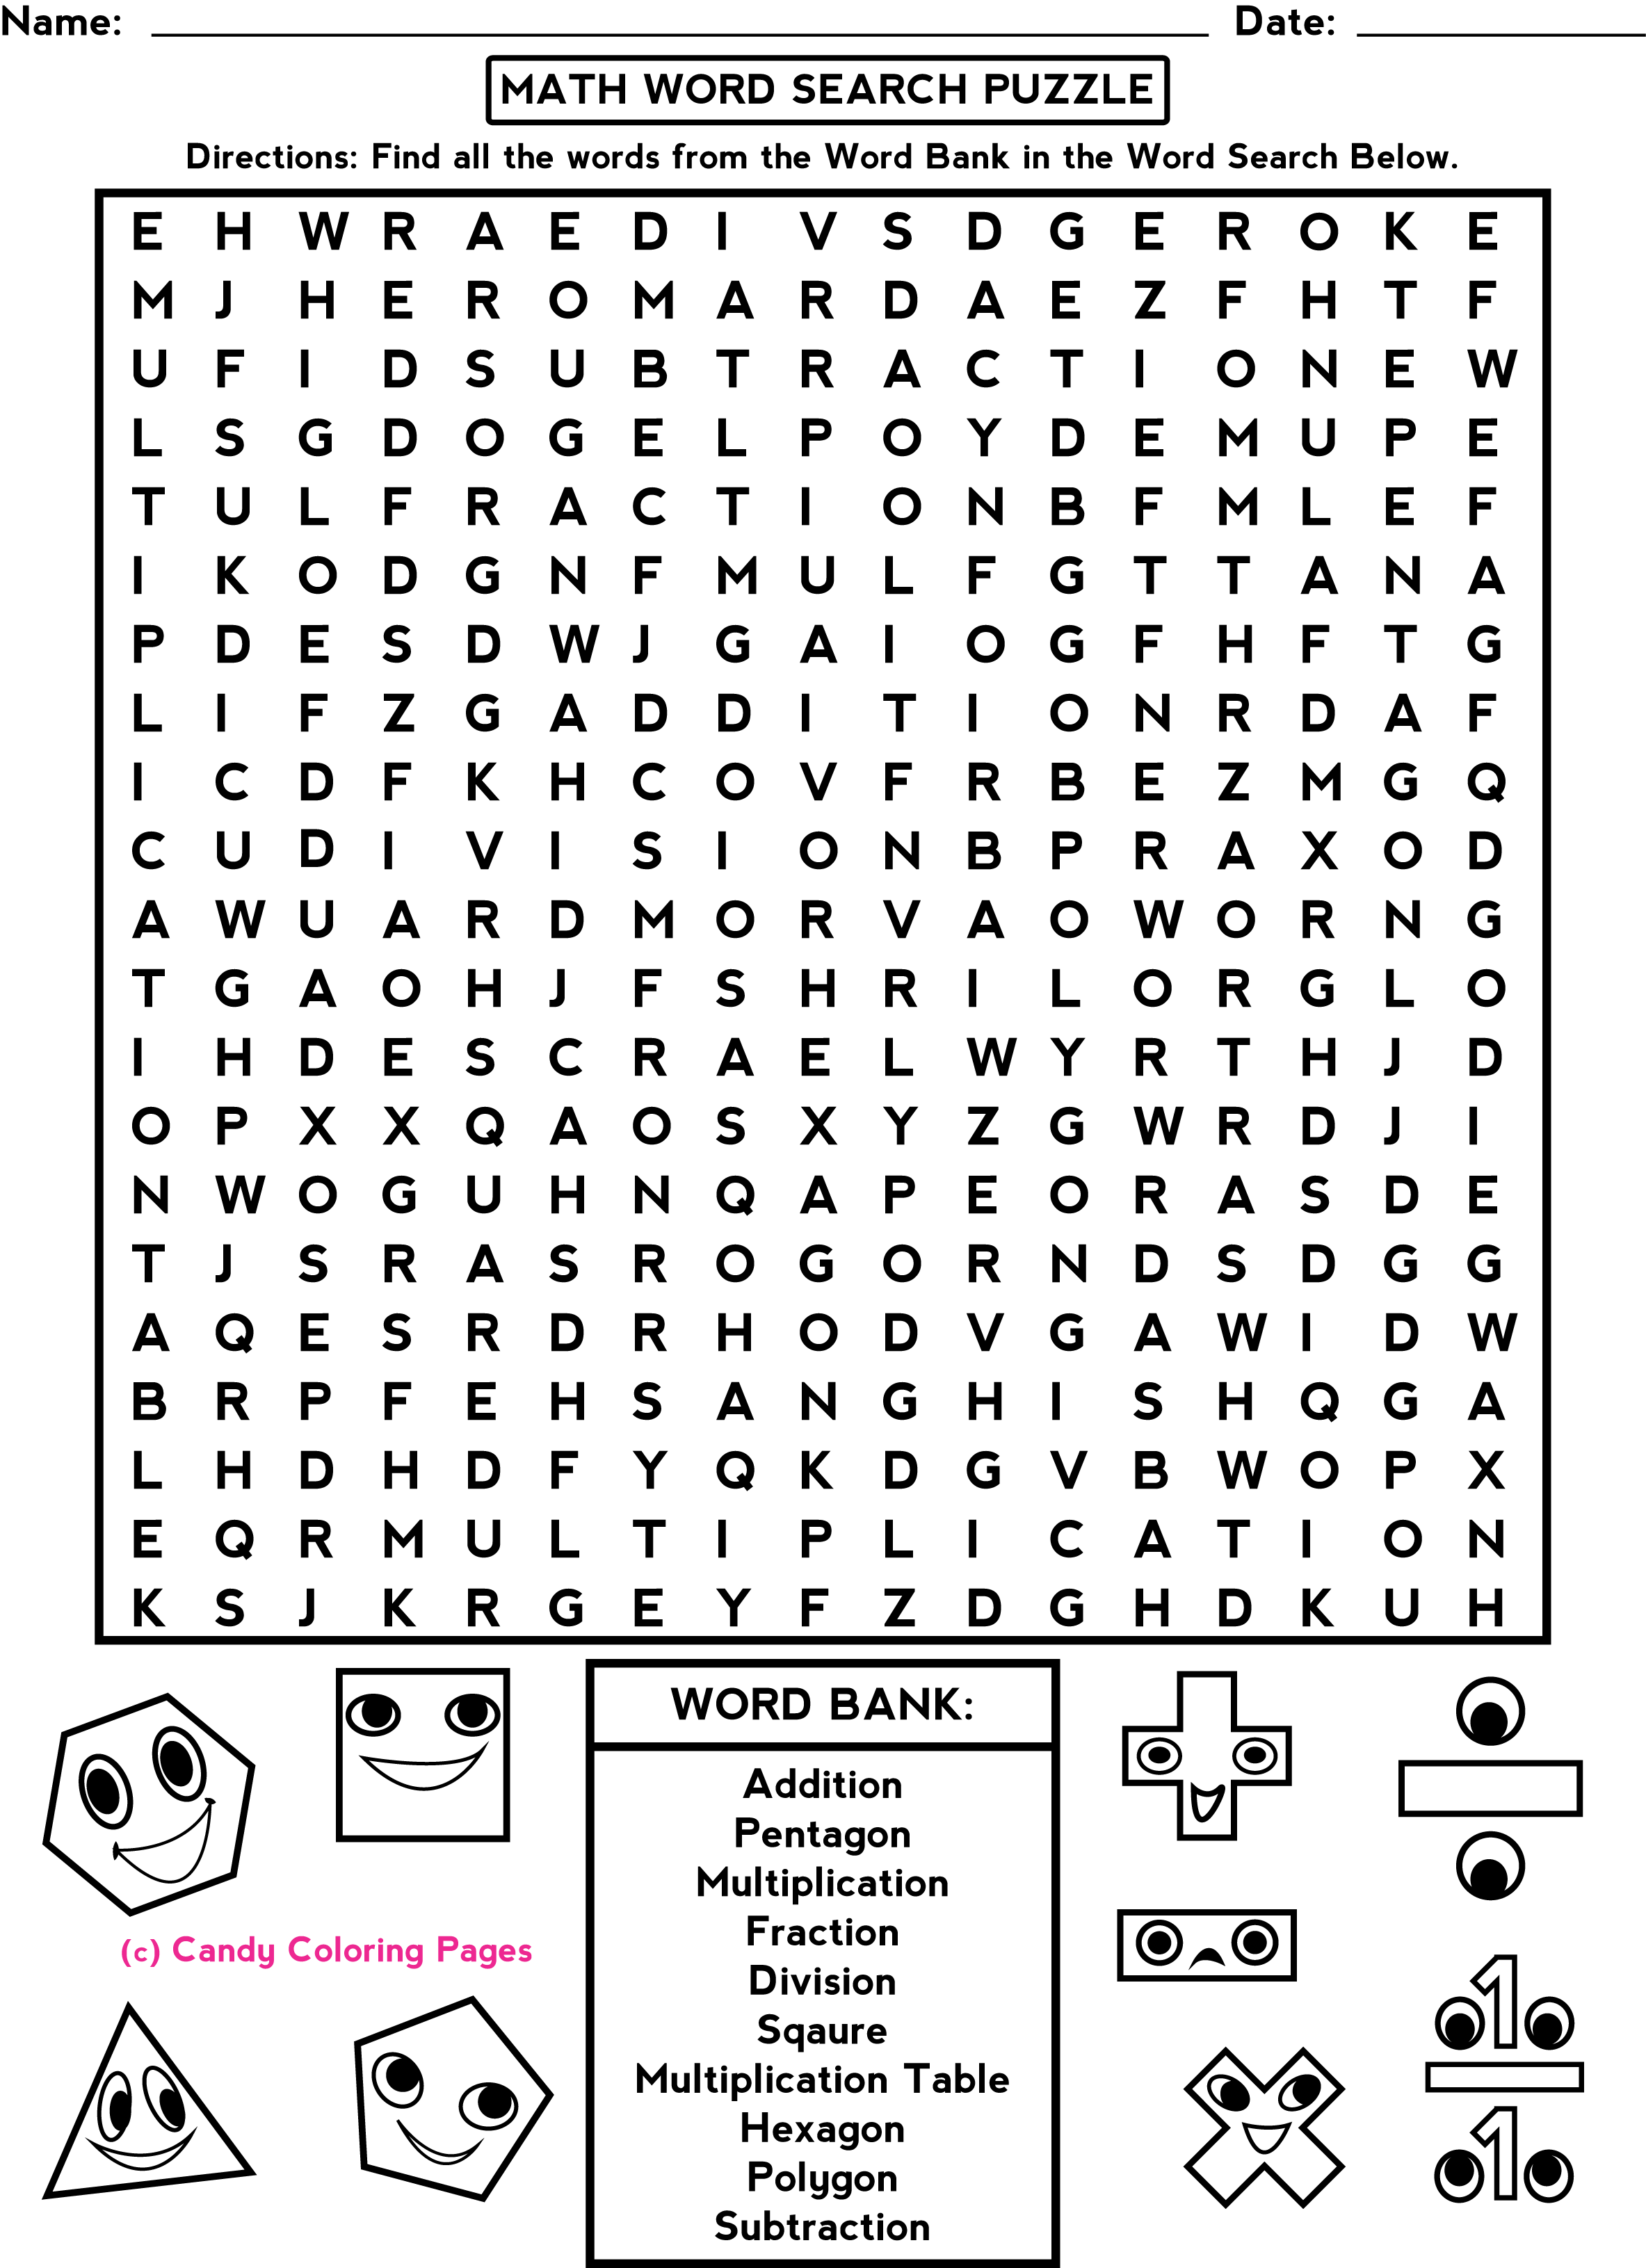 Math Word Search Puzzles Printable Image